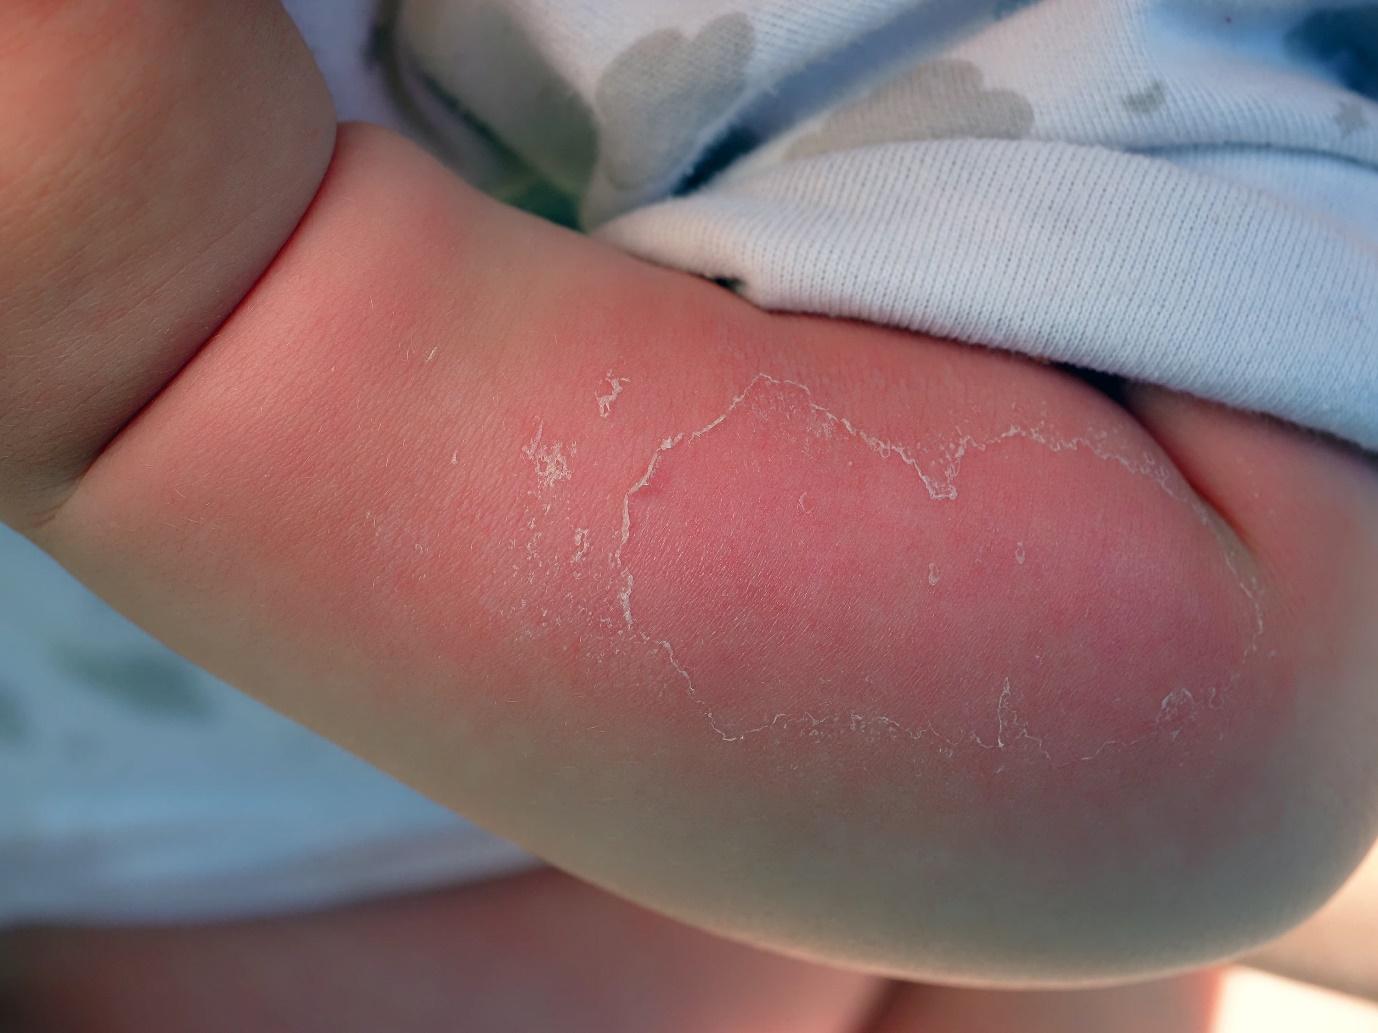 A baby's arm with a rash on itDescription automatically generated